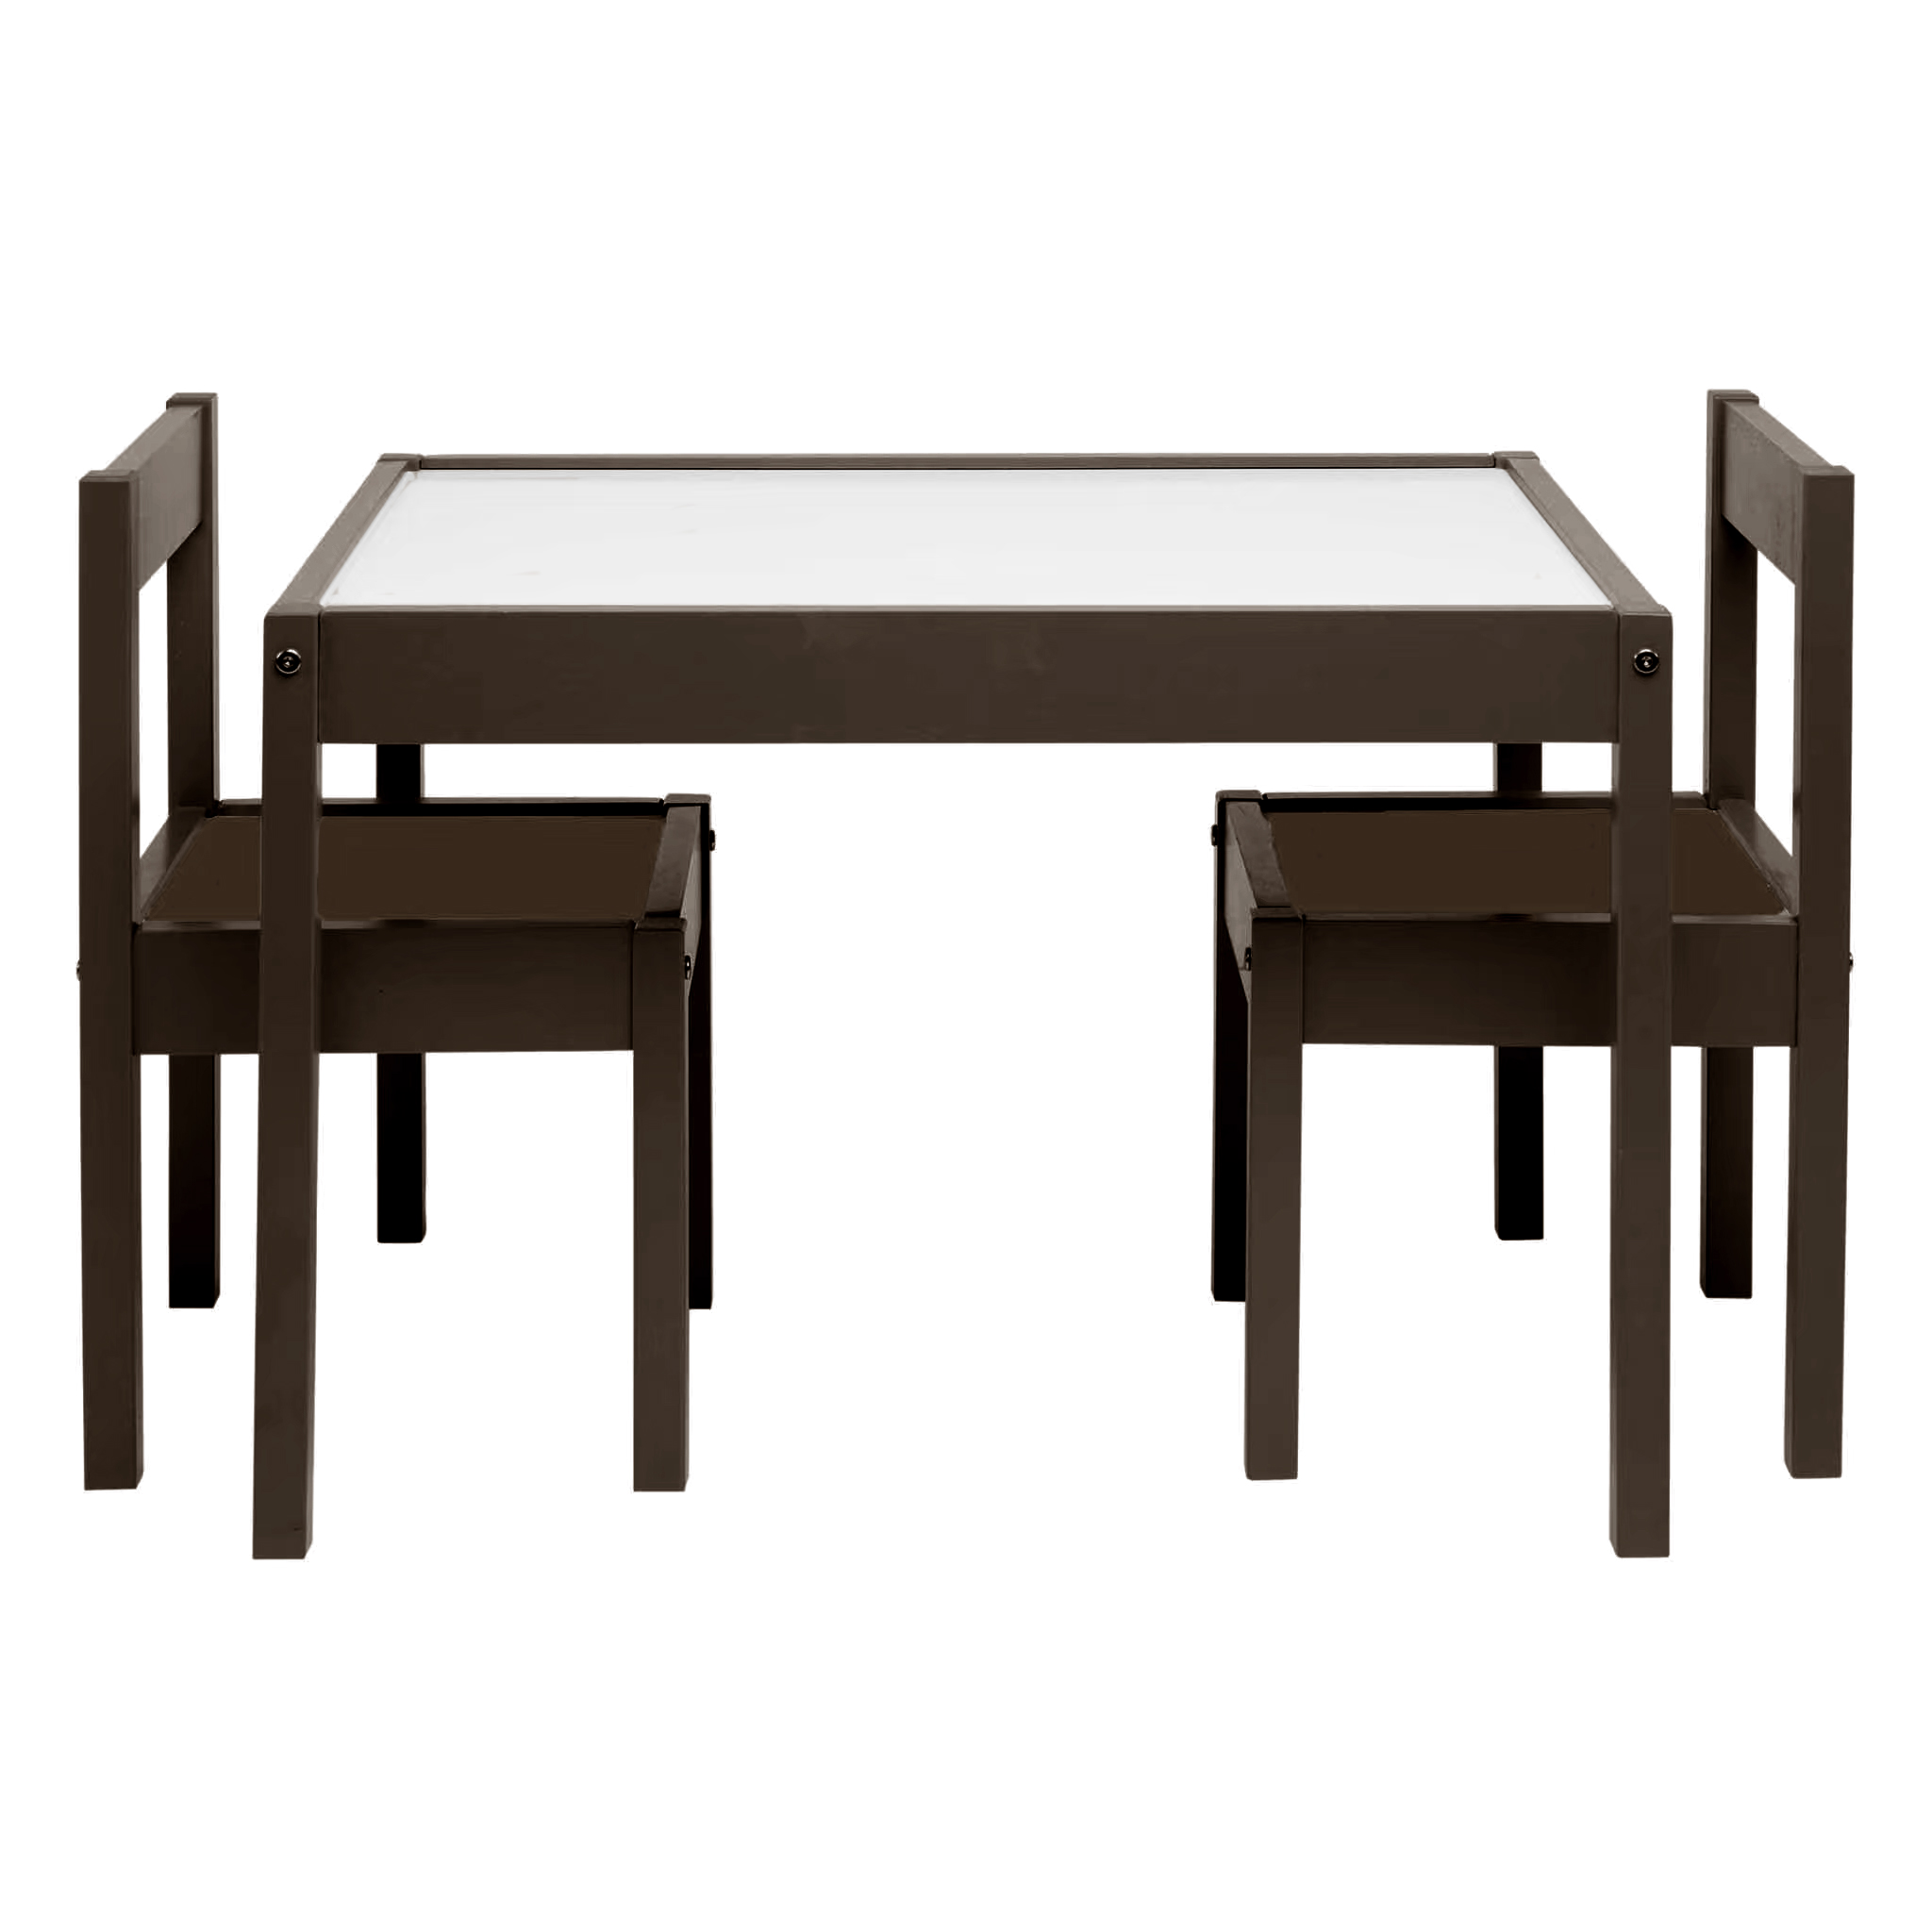 Your Zone Child 3-Piece Table and Chairs Set, in Espresso Age Group 1 to 5 Years Old. - image 4 of 6